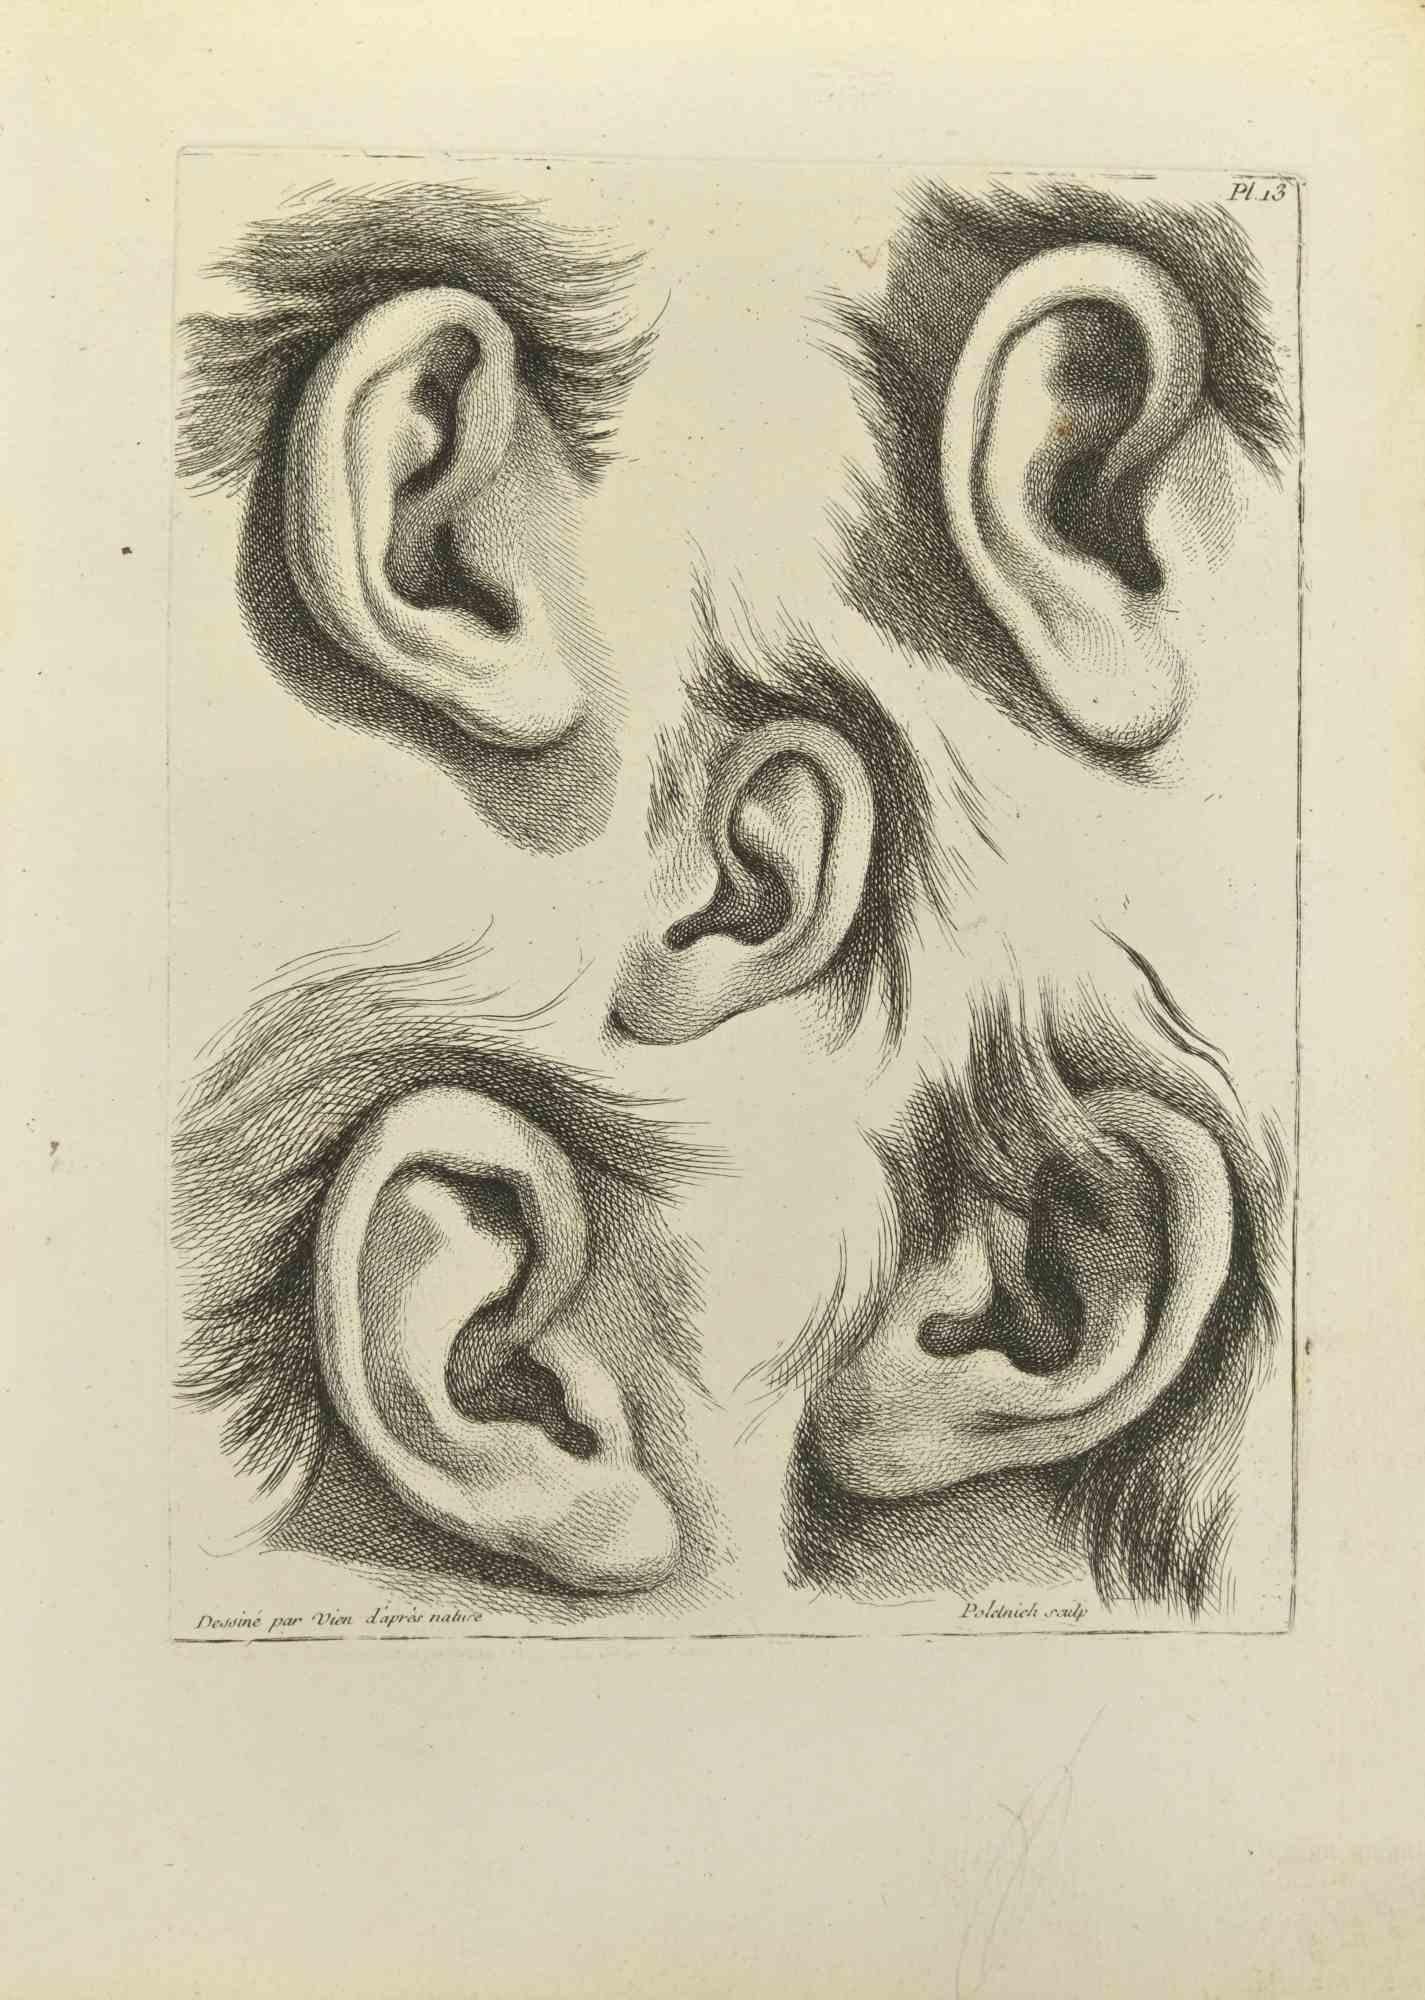 Ears is an etching realized by Jean Francois Poletnich in 1755.

Signed in the plate.

Good conditions with foxing.

The artwork is depicted through confident strokes.

The etching was realized for the anatomy study “JOMBERT, Charles-Antoine